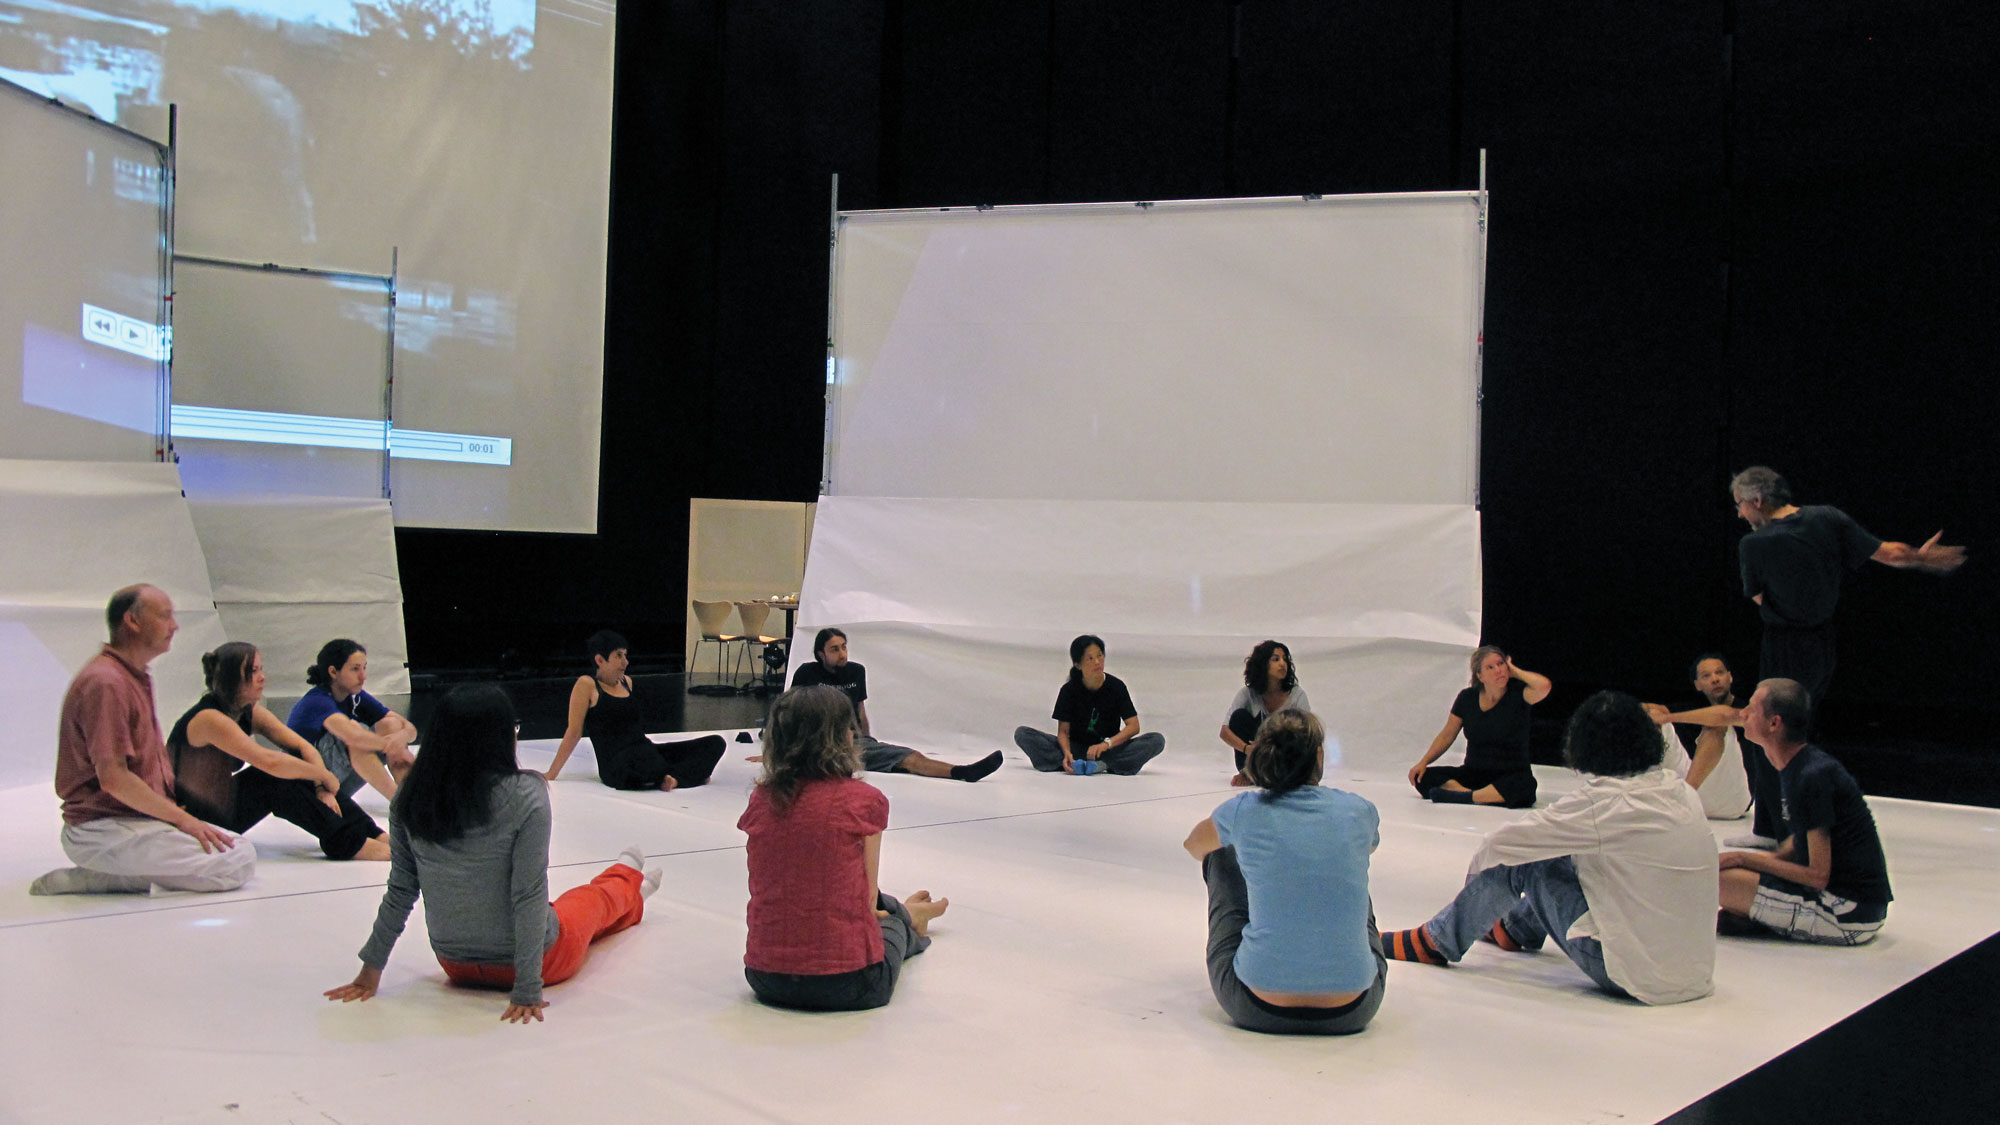 A  group of fourteen dancers dressed causally for rehearsal seating in a circle in a white floor listening intently to a speaker who is standing with arms gesturing outward.